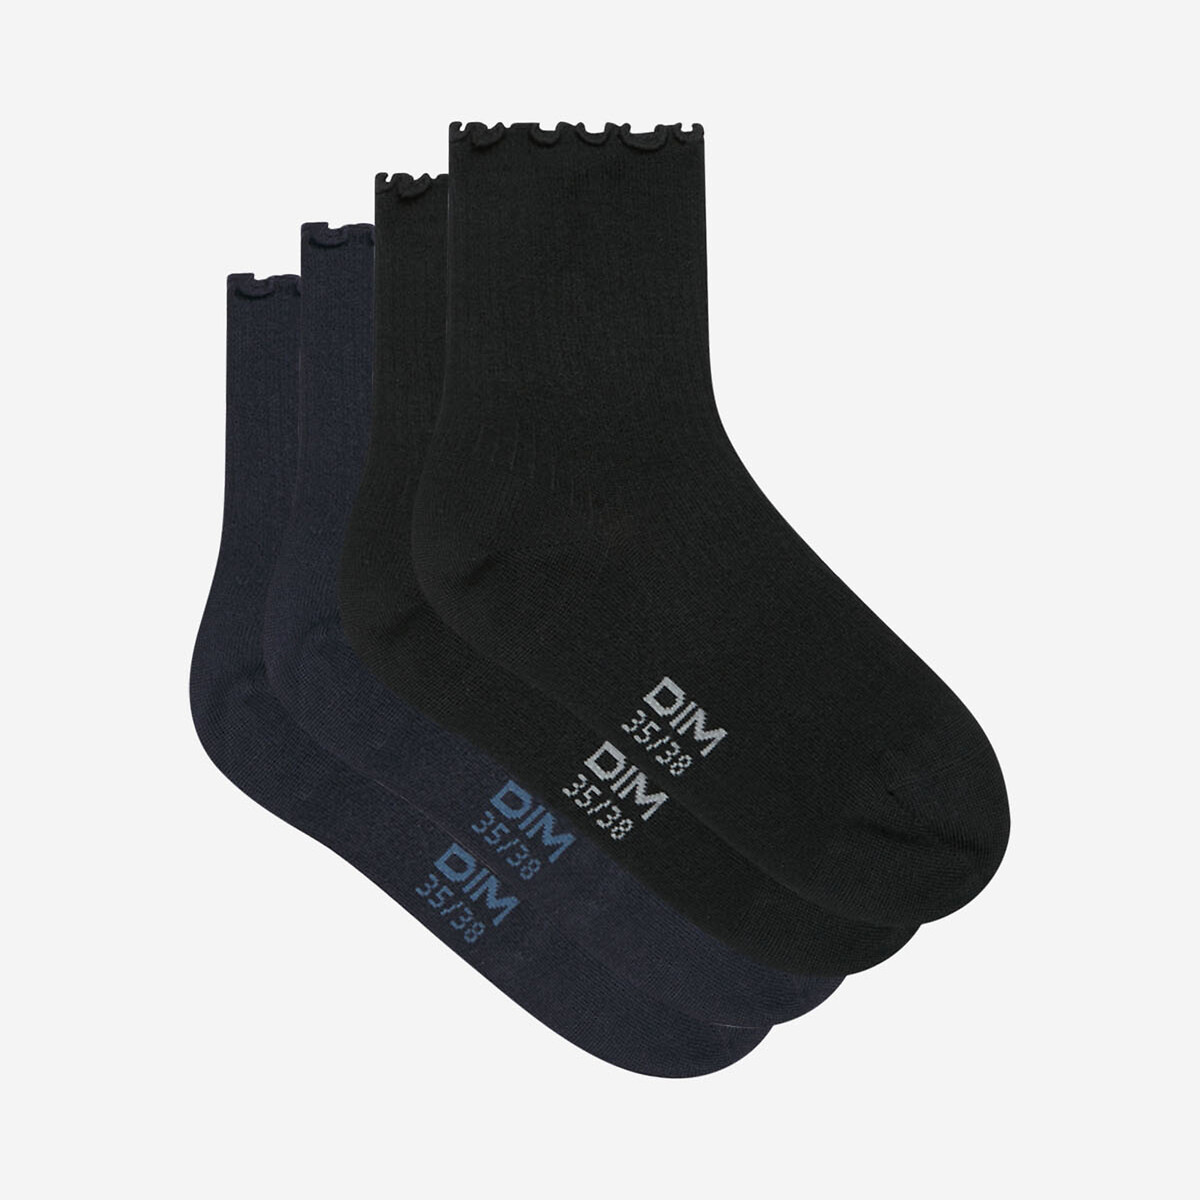 Pack of 2 Pairs of Socks with Ruffled Edging